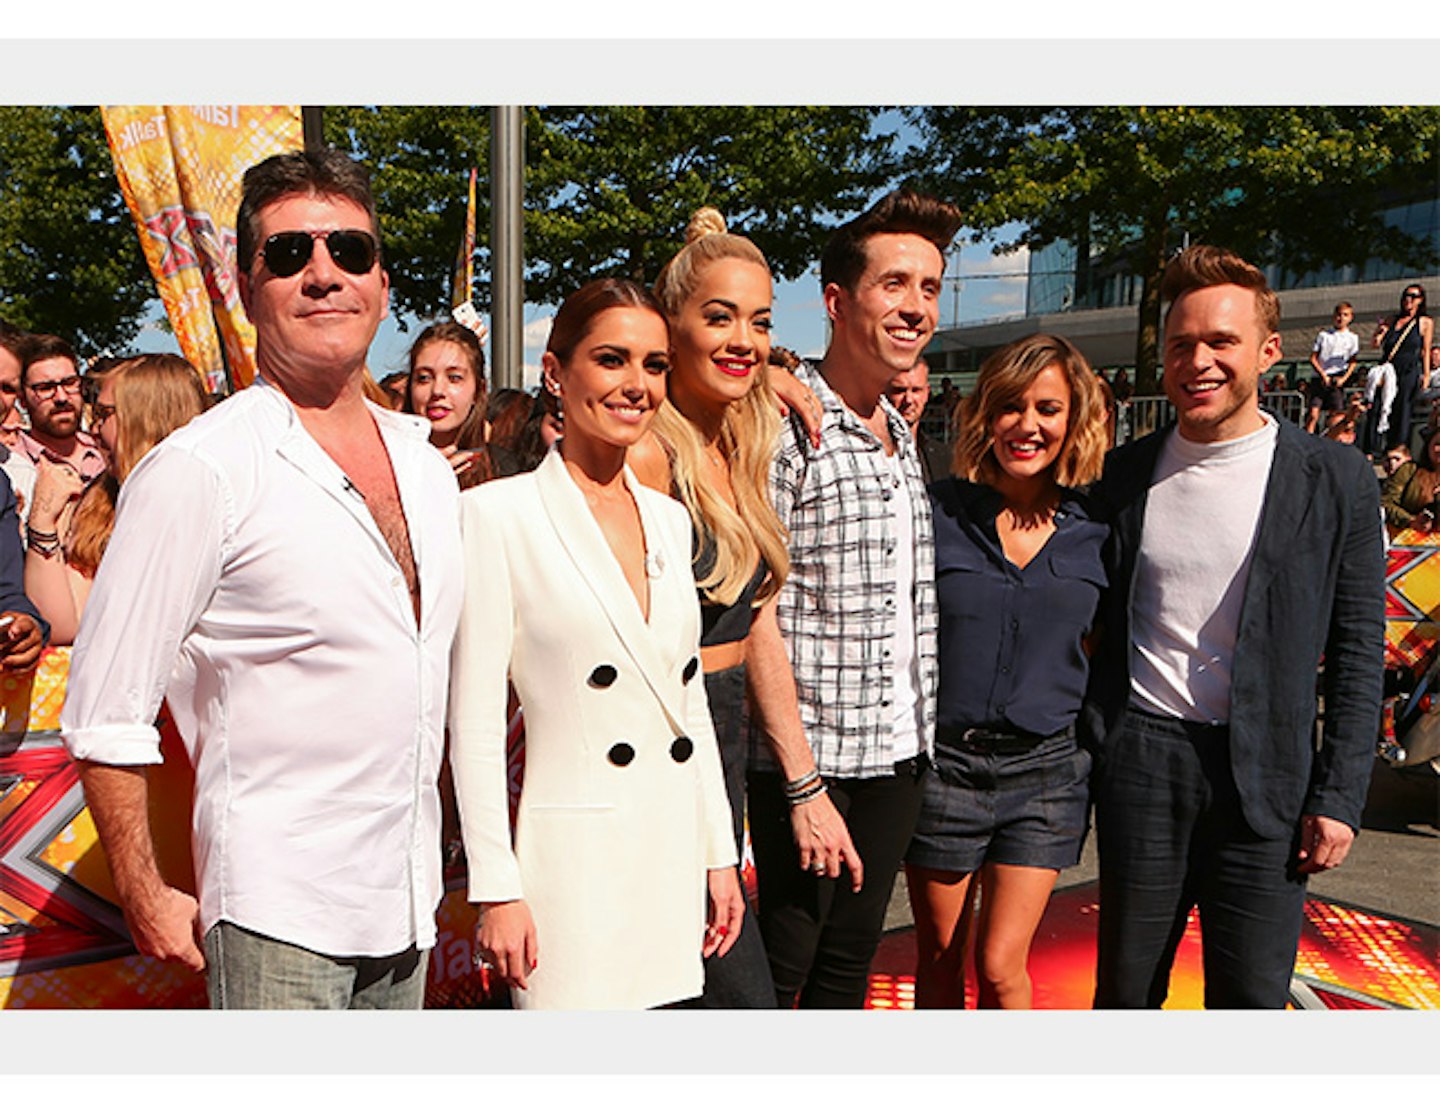 Cheryl with Simon, new judges Rita Ora and Nick Grimshaw, and new presenters Caroline Flack and Olly Murs